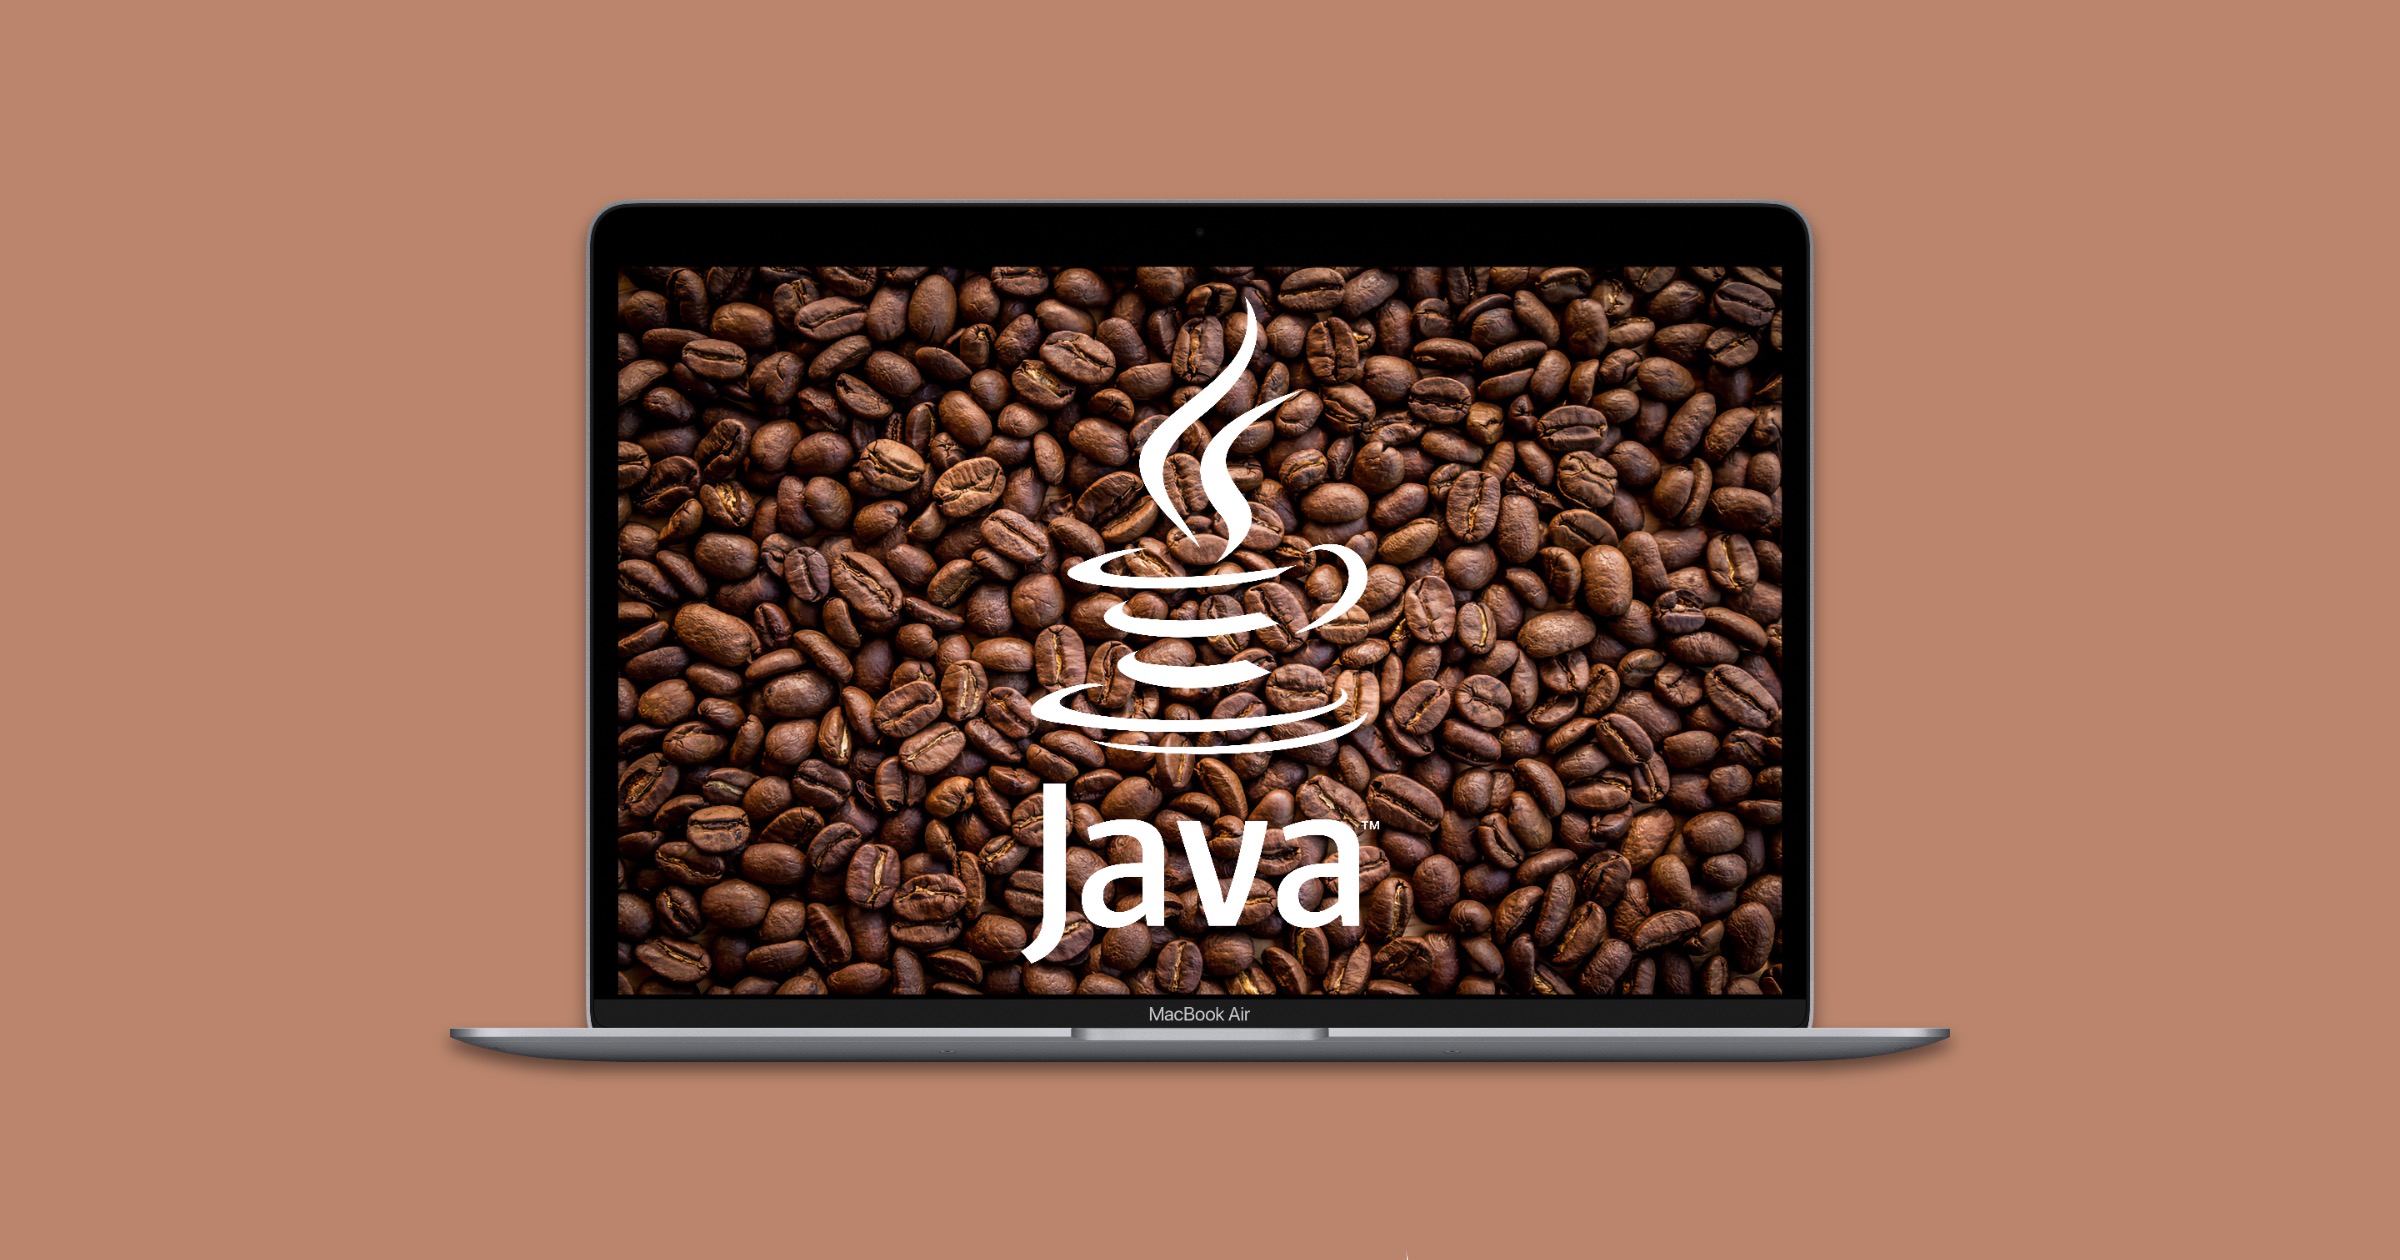 Microsoft and Azul are Working on Java for M1 Macs